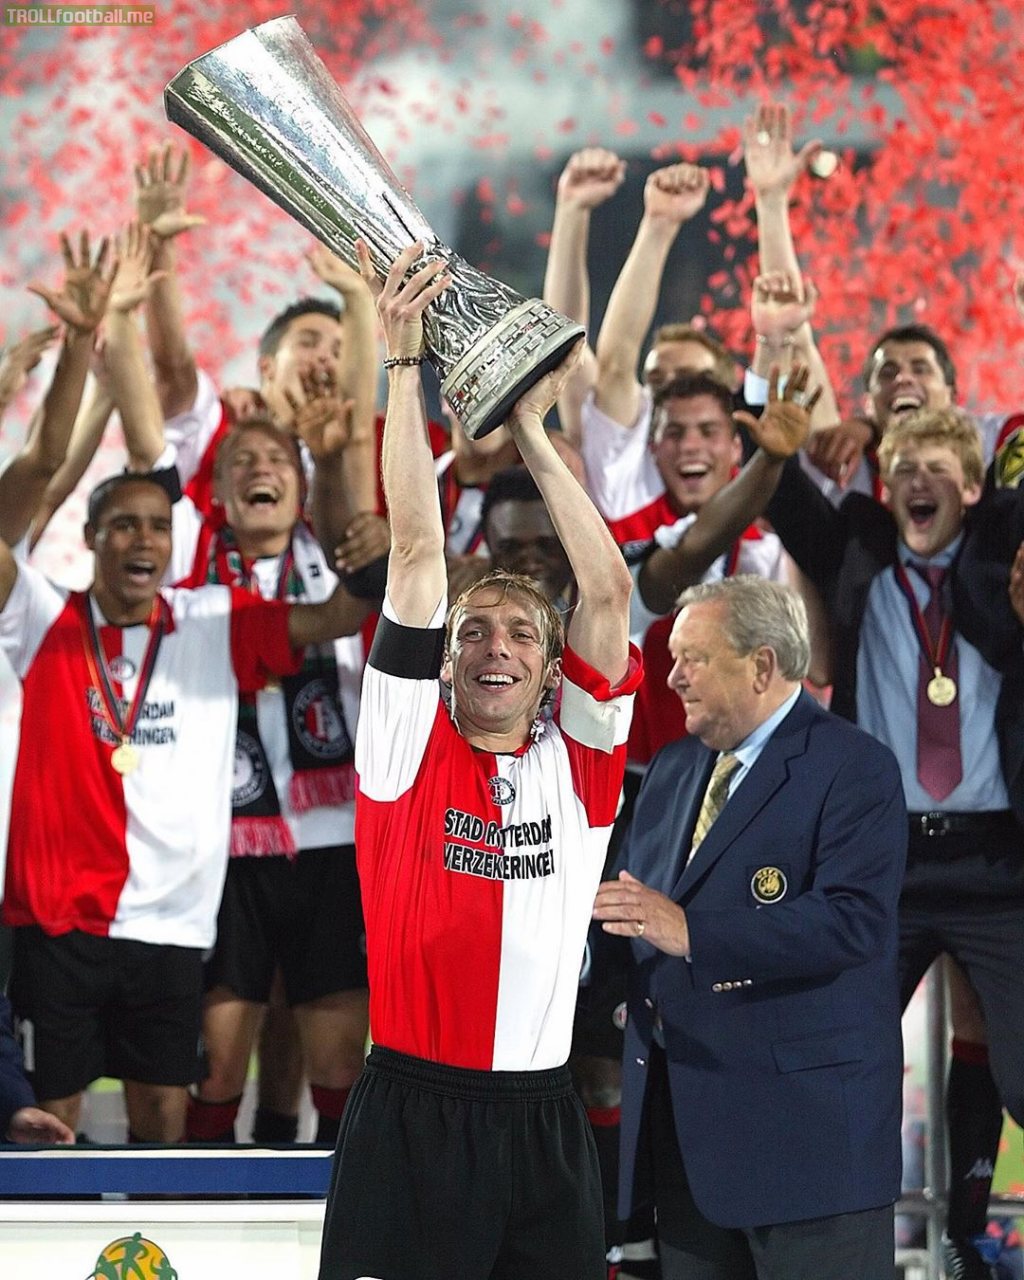 on this day in 2002 Feyenoord beat Borussia Dortmund 3-2 in De Kuip to win the UEFA Cup